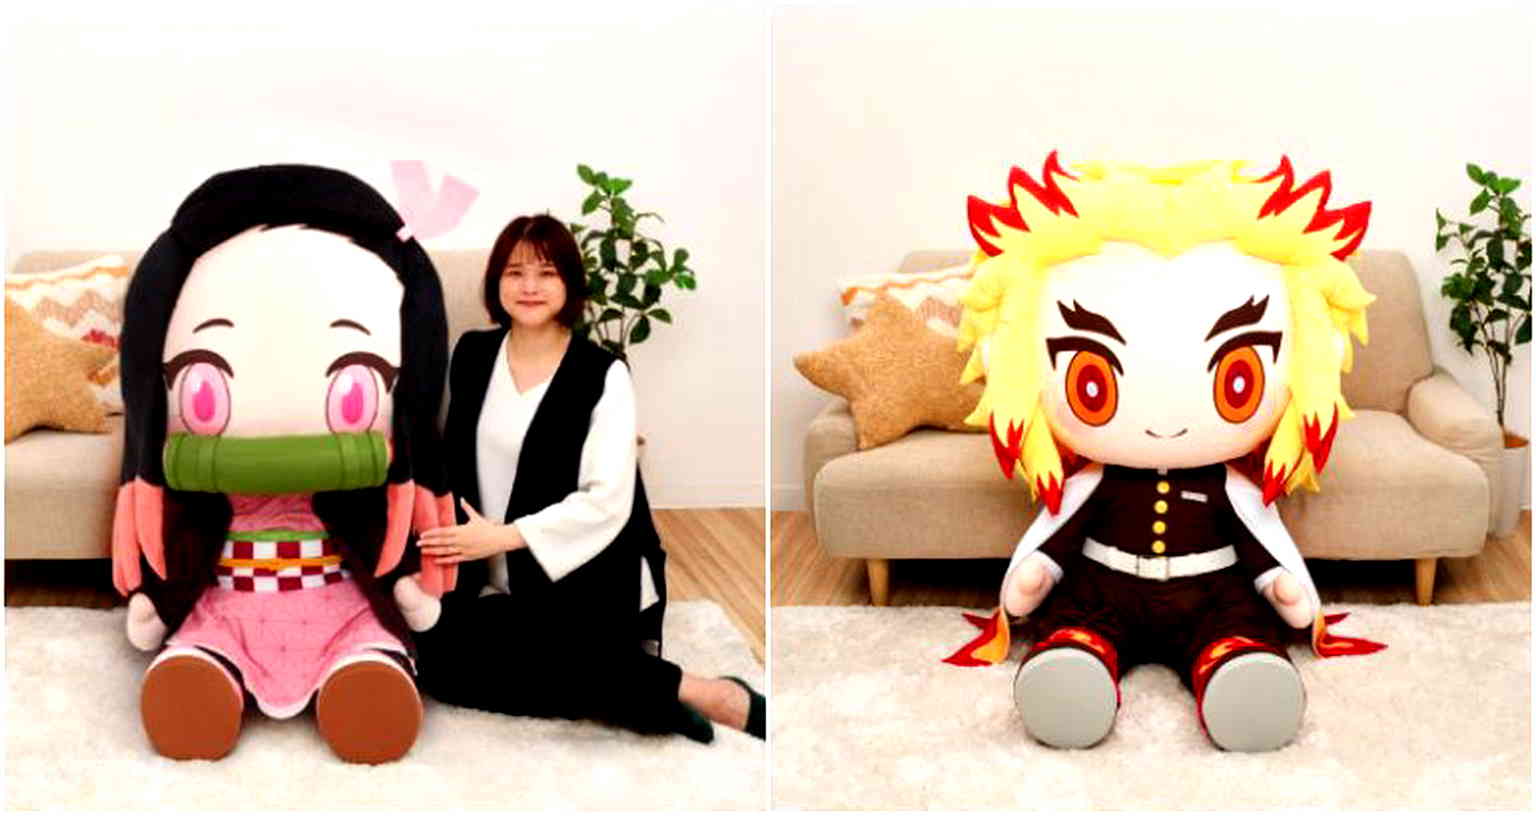 These giant ‘Demon Slayer’ plushies will have you practicing your breathing techniques